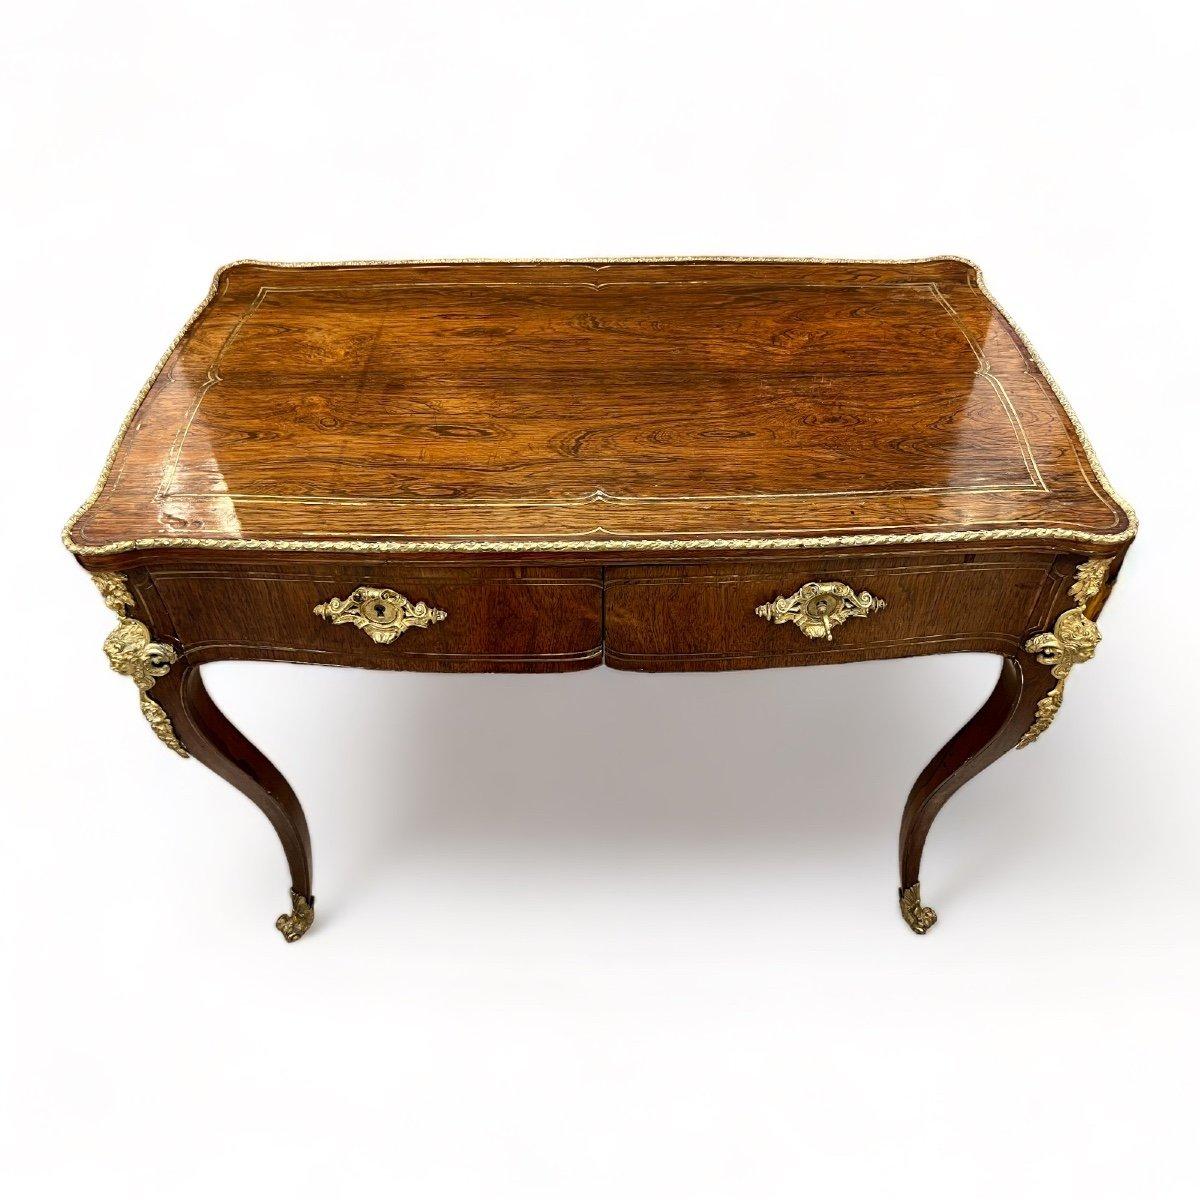 French 19th Century Transition-Style Writing Desk from the Napoleon III Period For Sale